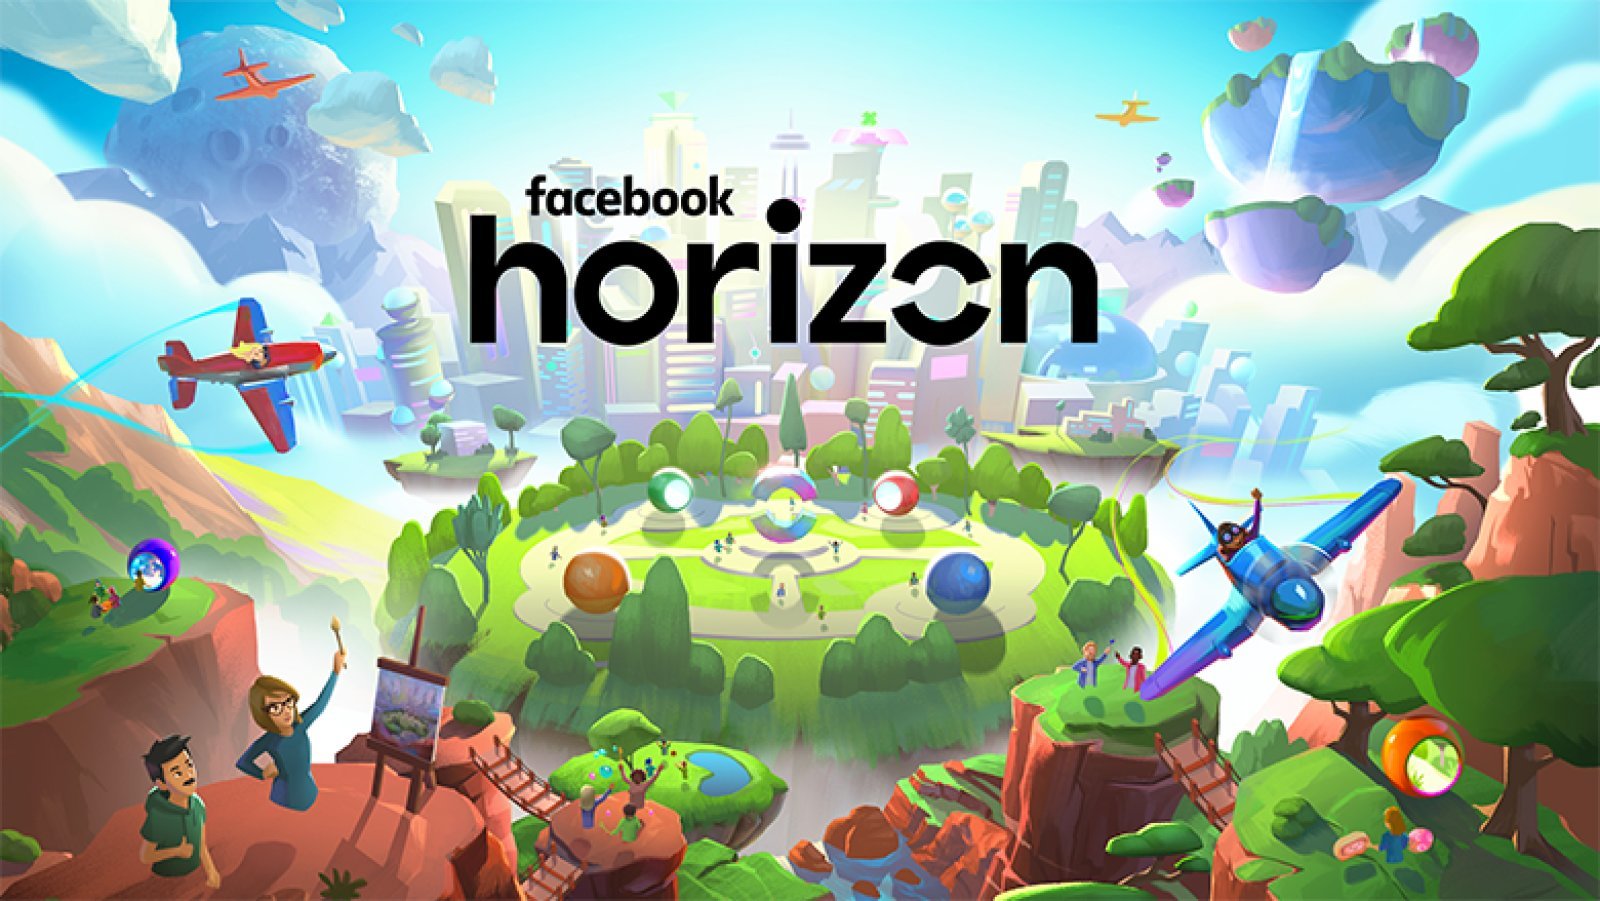 Facebook Horizon | Everything We know About Facebook’s Very Own OASIS